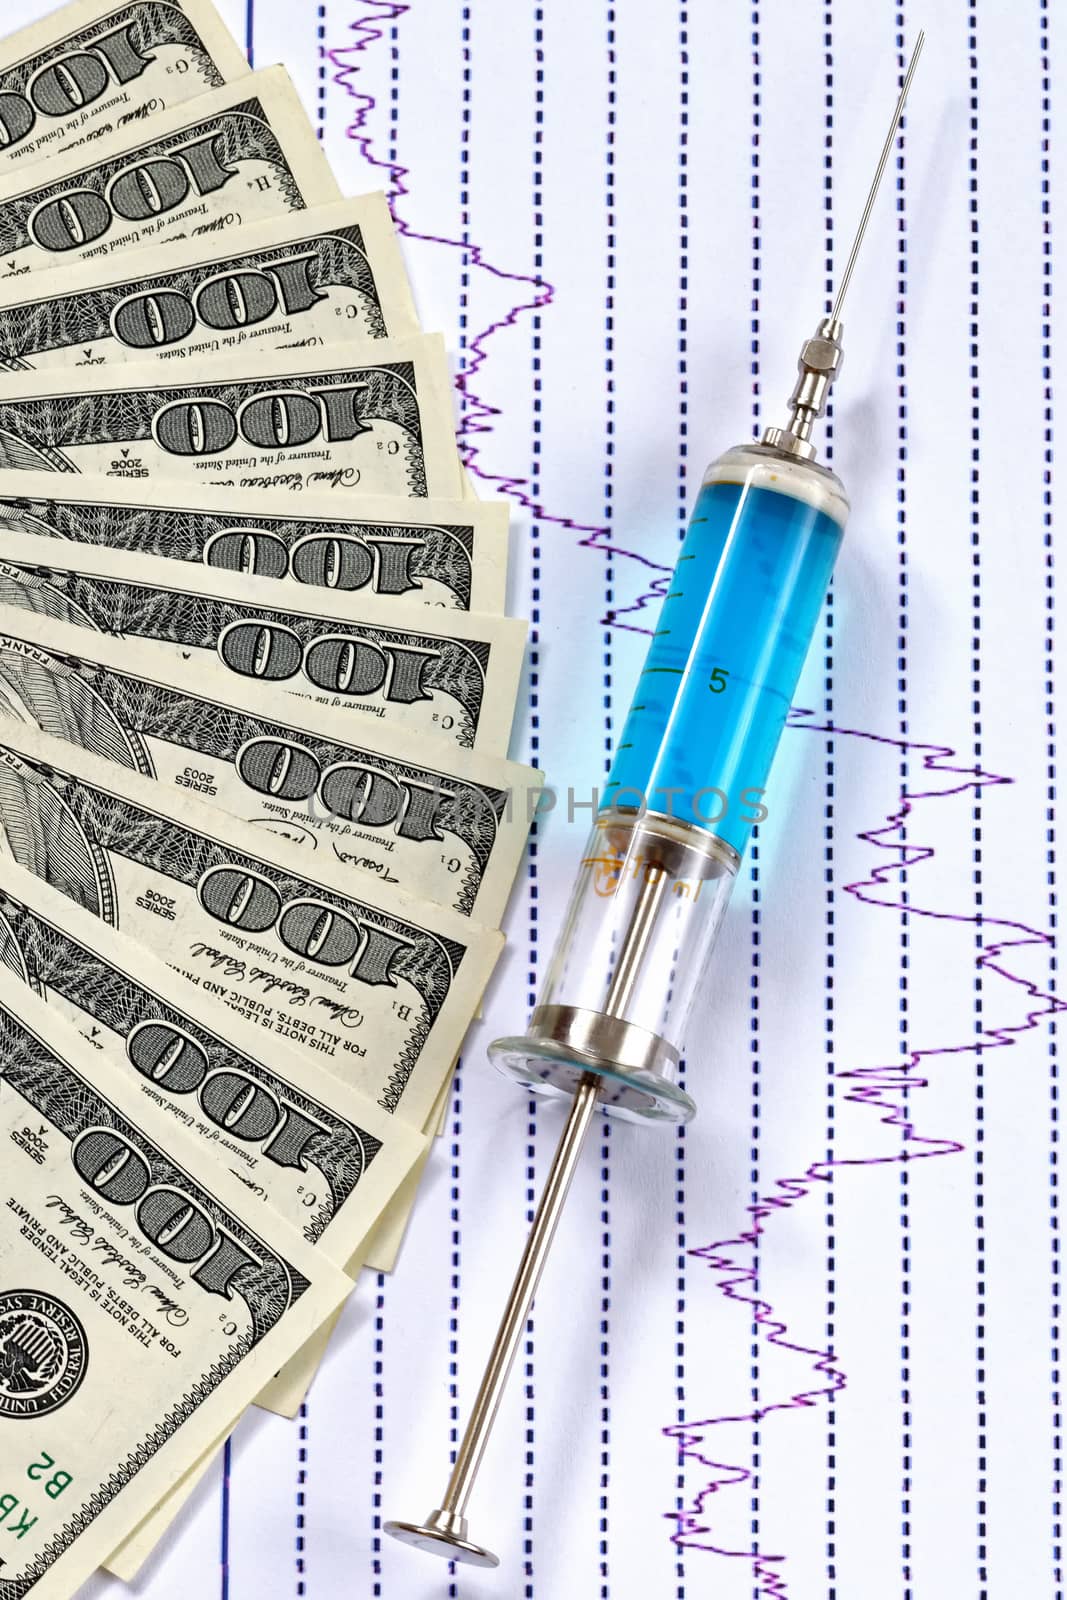 injection needle and banknotes, graph by Bleshka